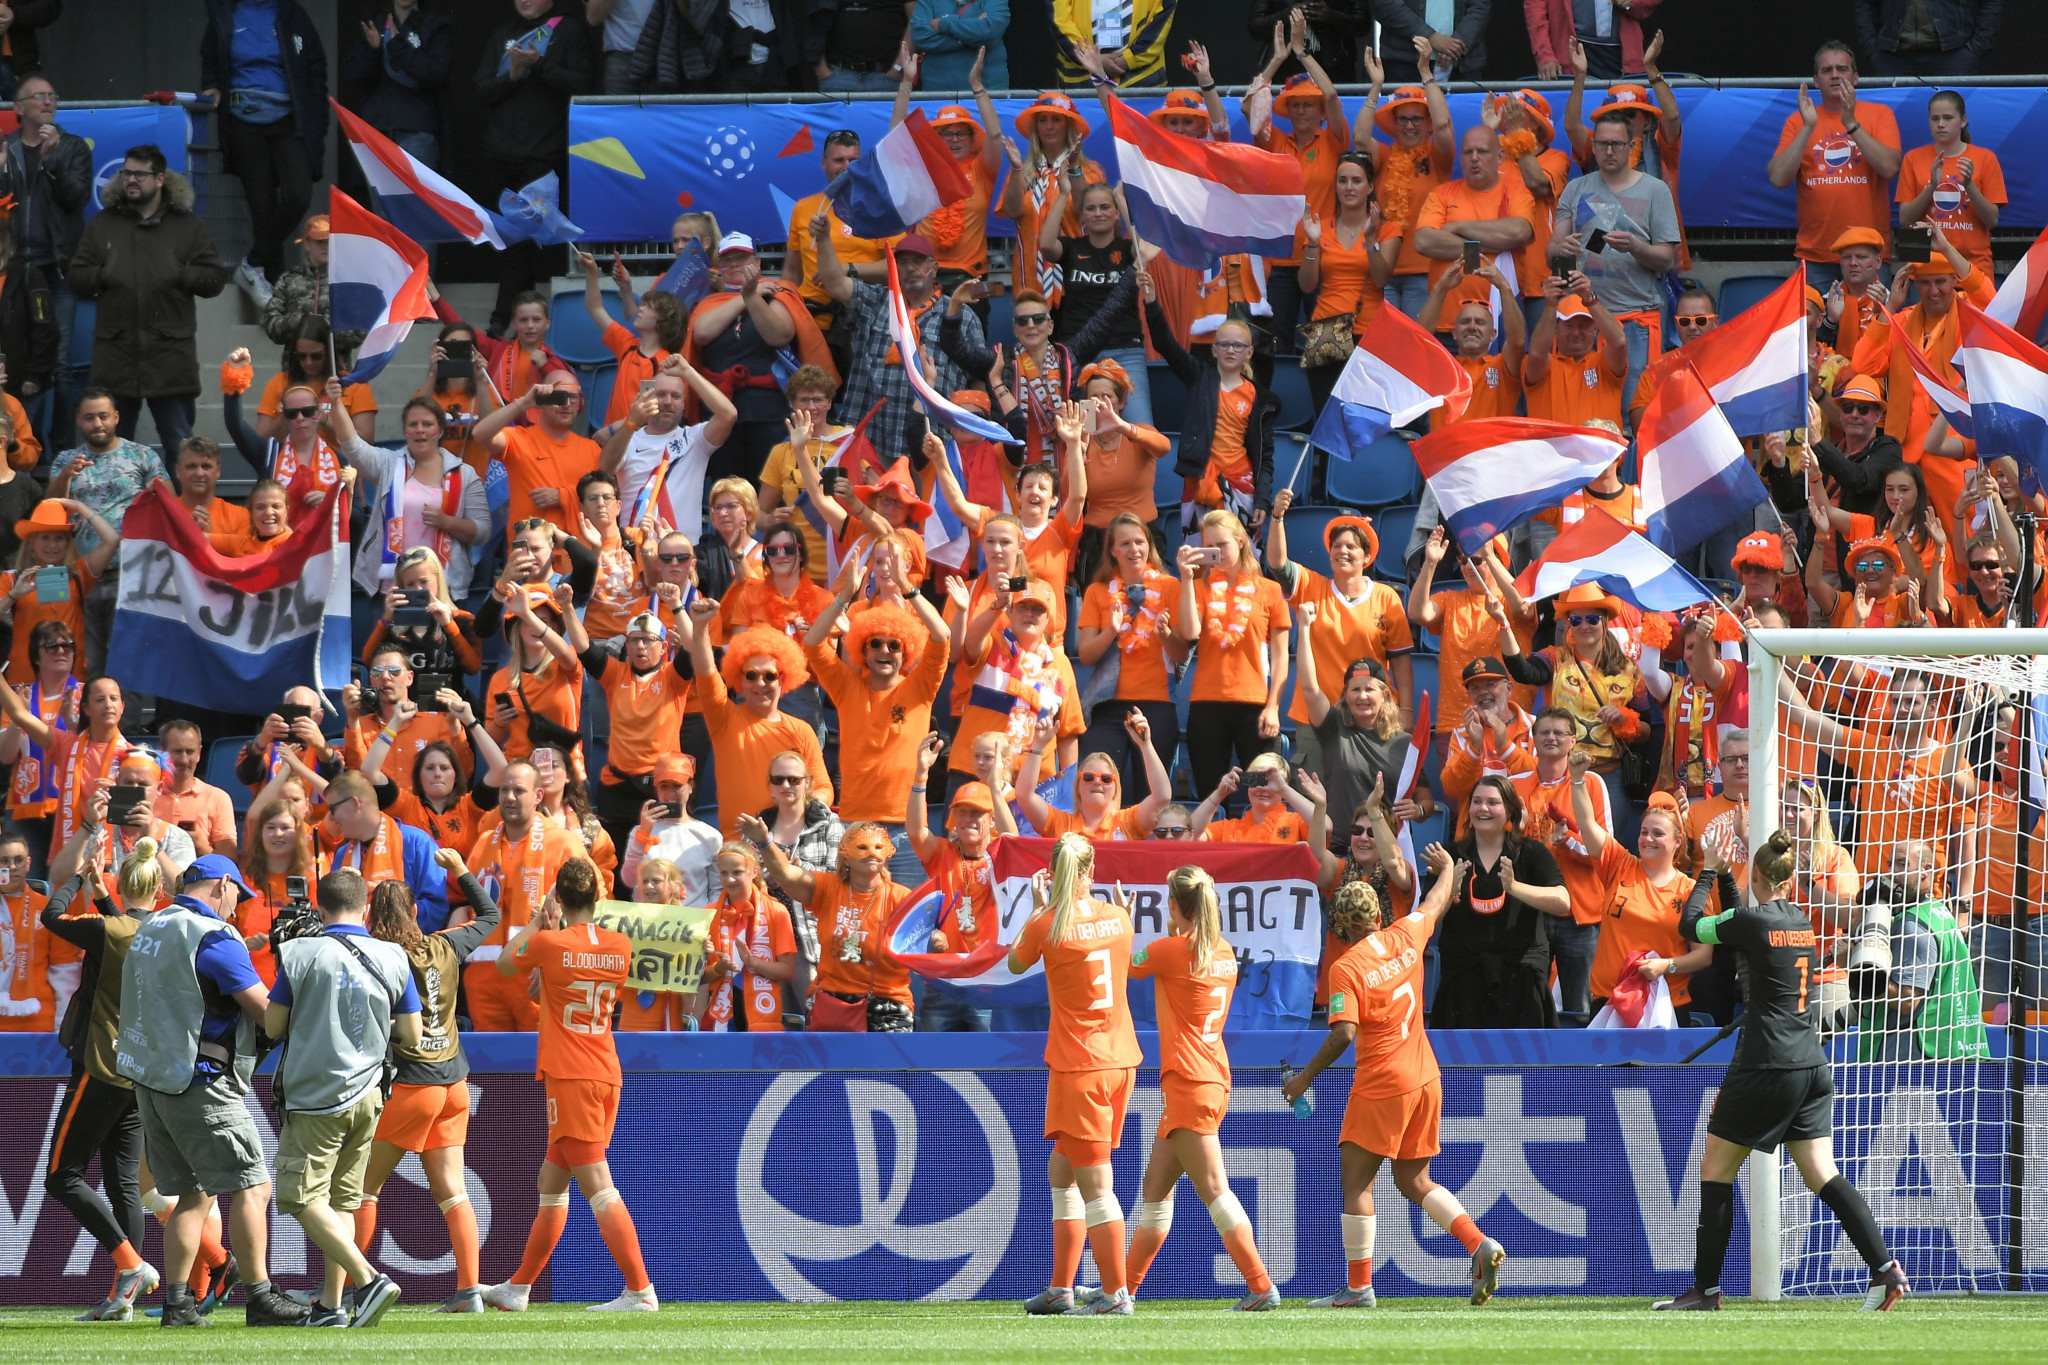 The Netherlands were bolstered by the high level of Dutch support in the crowd ©Getty Images